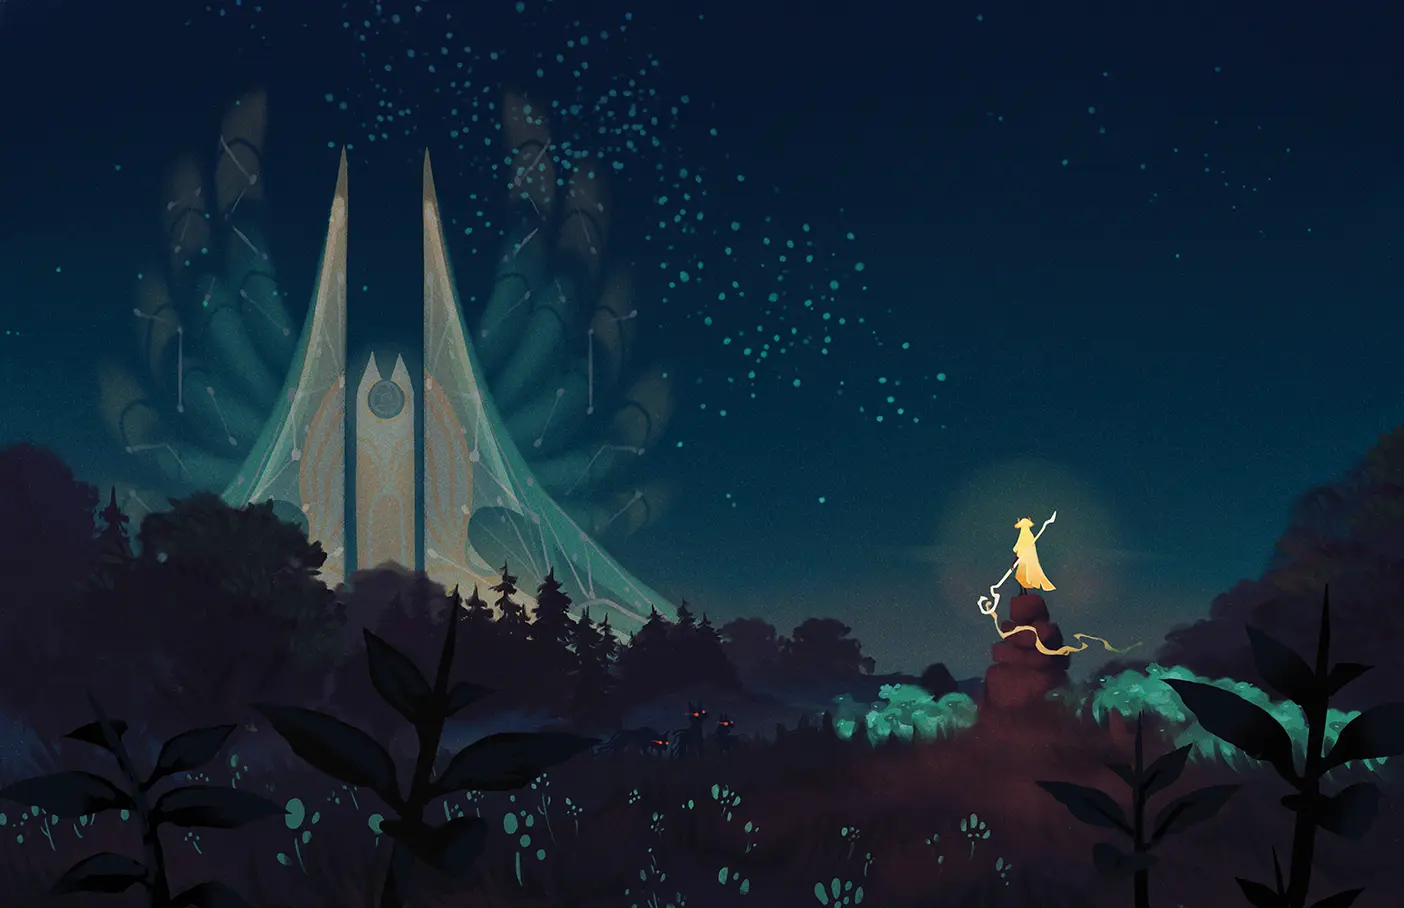 A glowing gold figure stands on a stone column overlooking a dark forest, gazing towards a tall, double-spired transparent structure on the horizon.